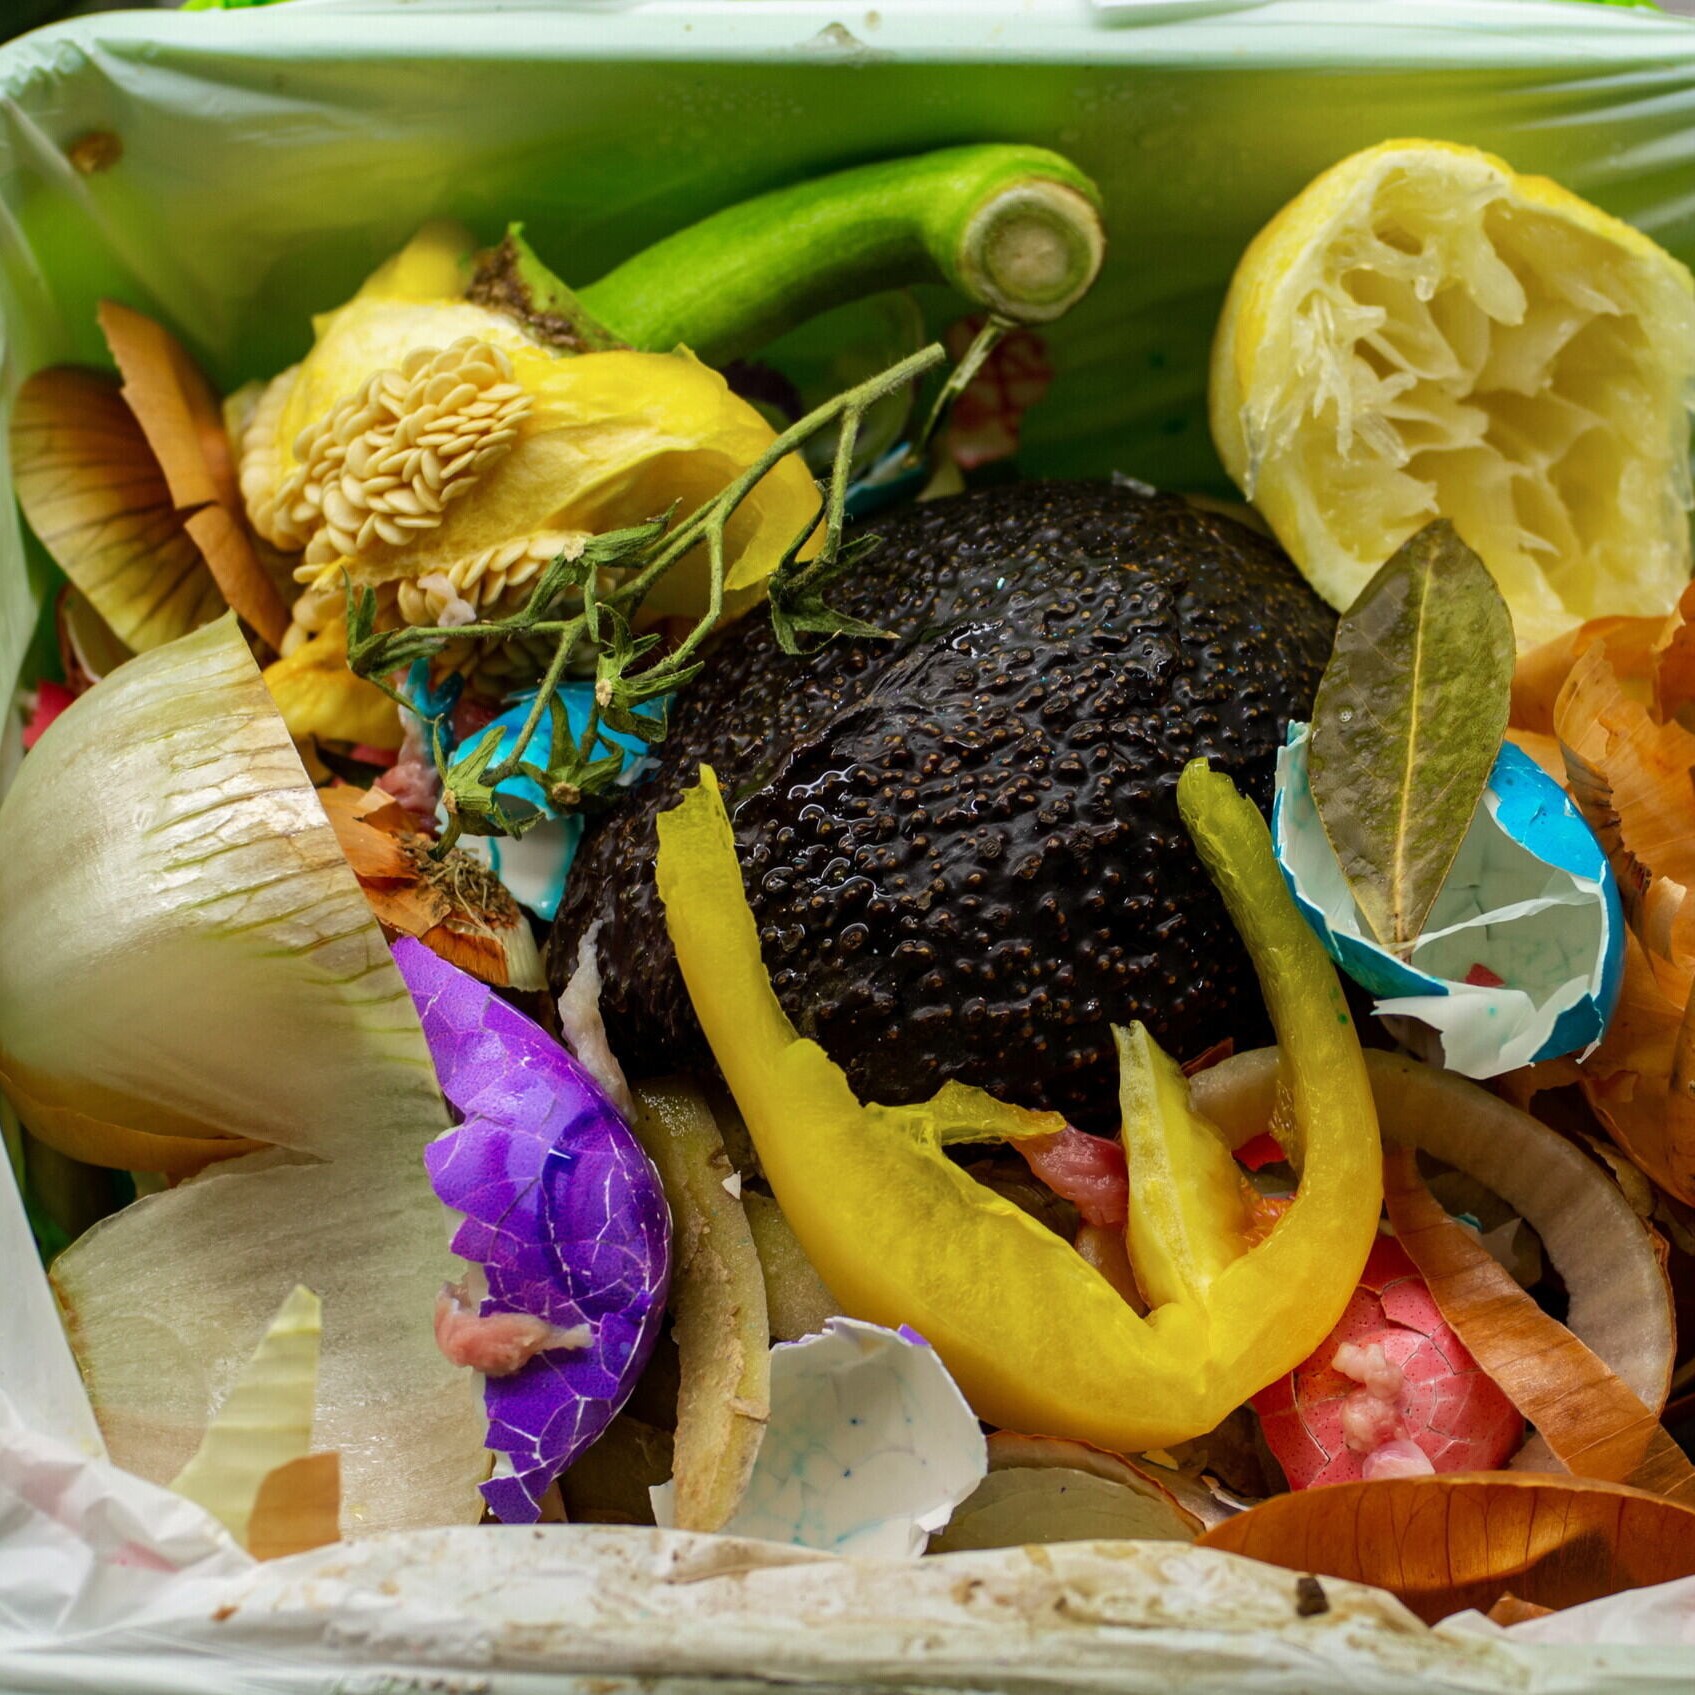 A full compost kitchen pail with various discard vegetables - avocado skin, juiced lemon, onion peel, bell pepper core, etc.